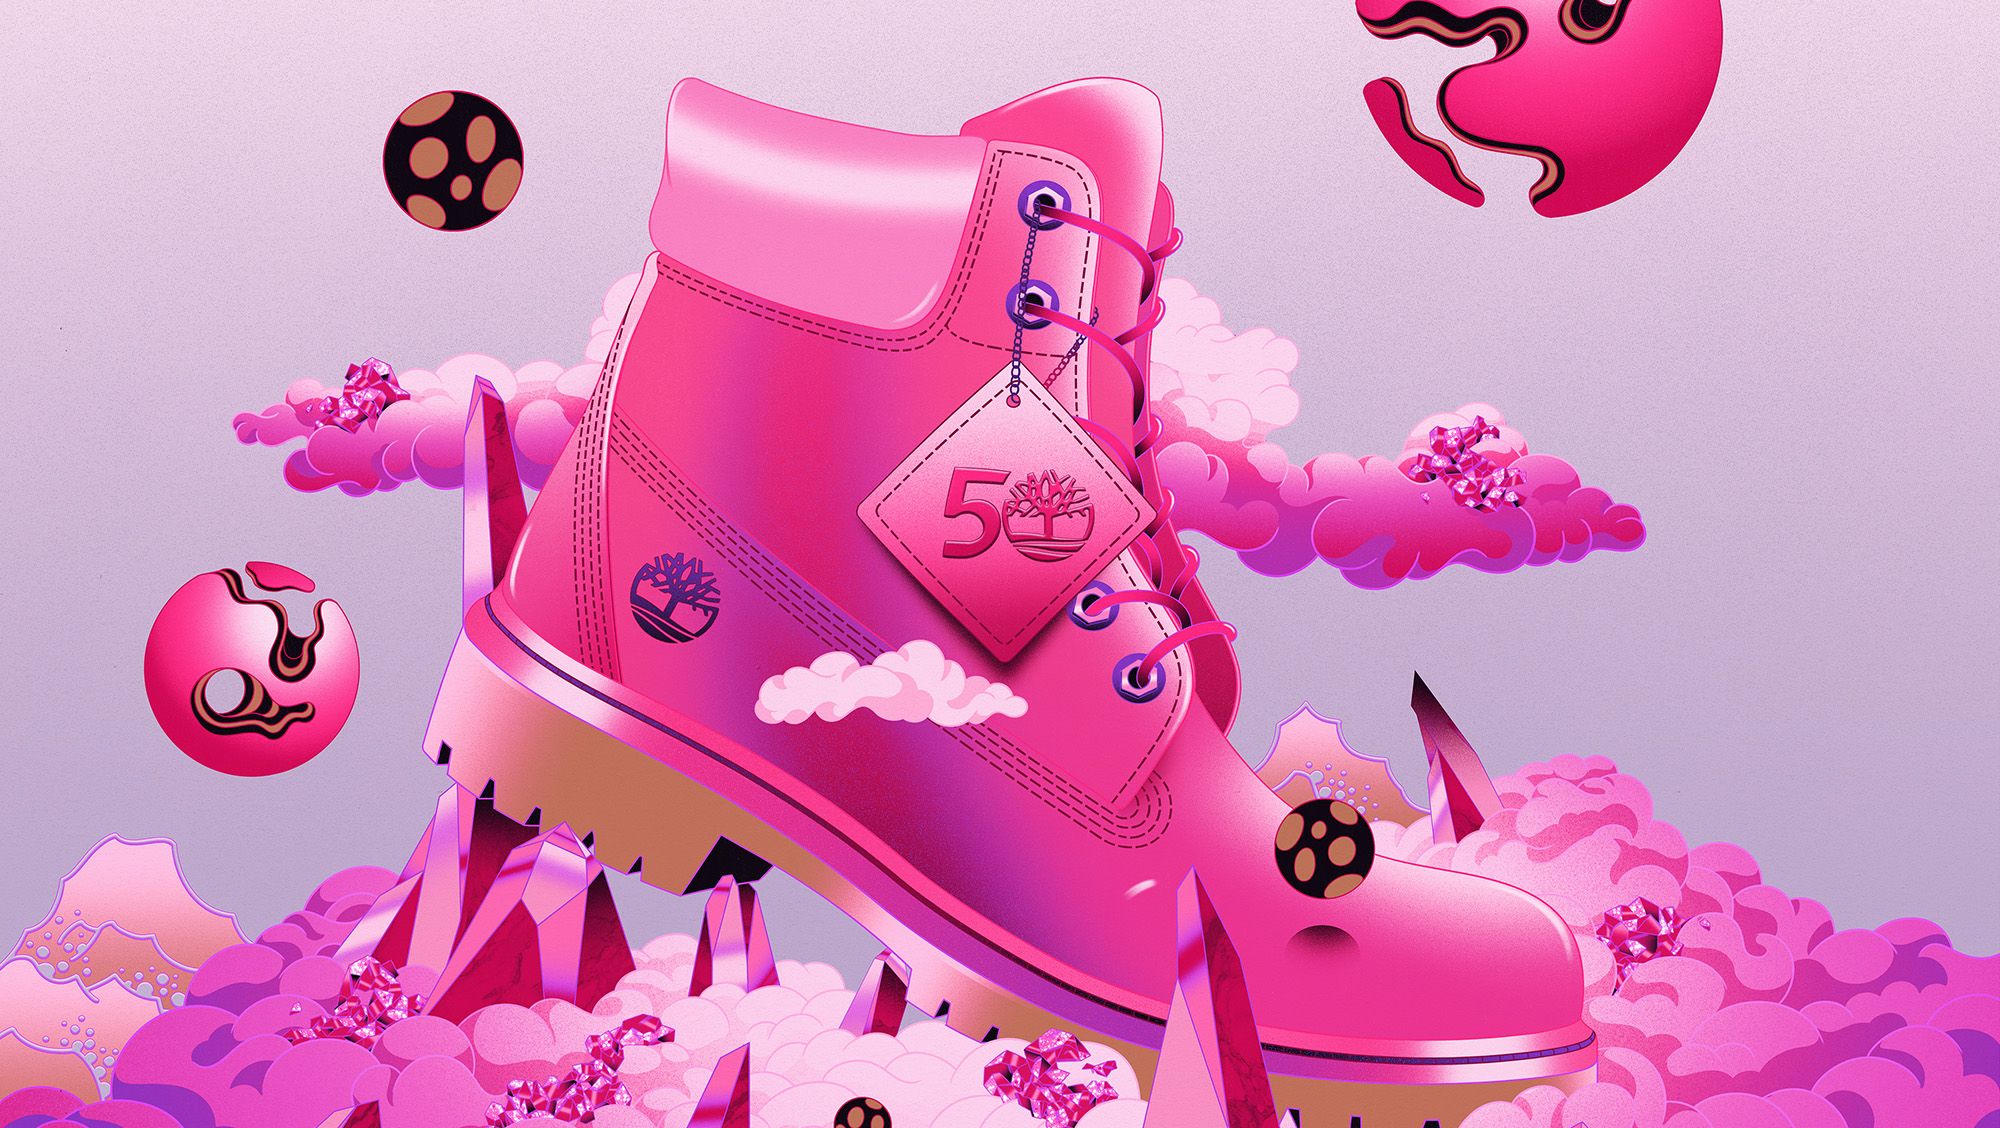 Illustration of the Vivacious pink color way for the Timberland 50th Anniversary boot. shows boot on pink cloud planet with sharp pink crystal-like structures.